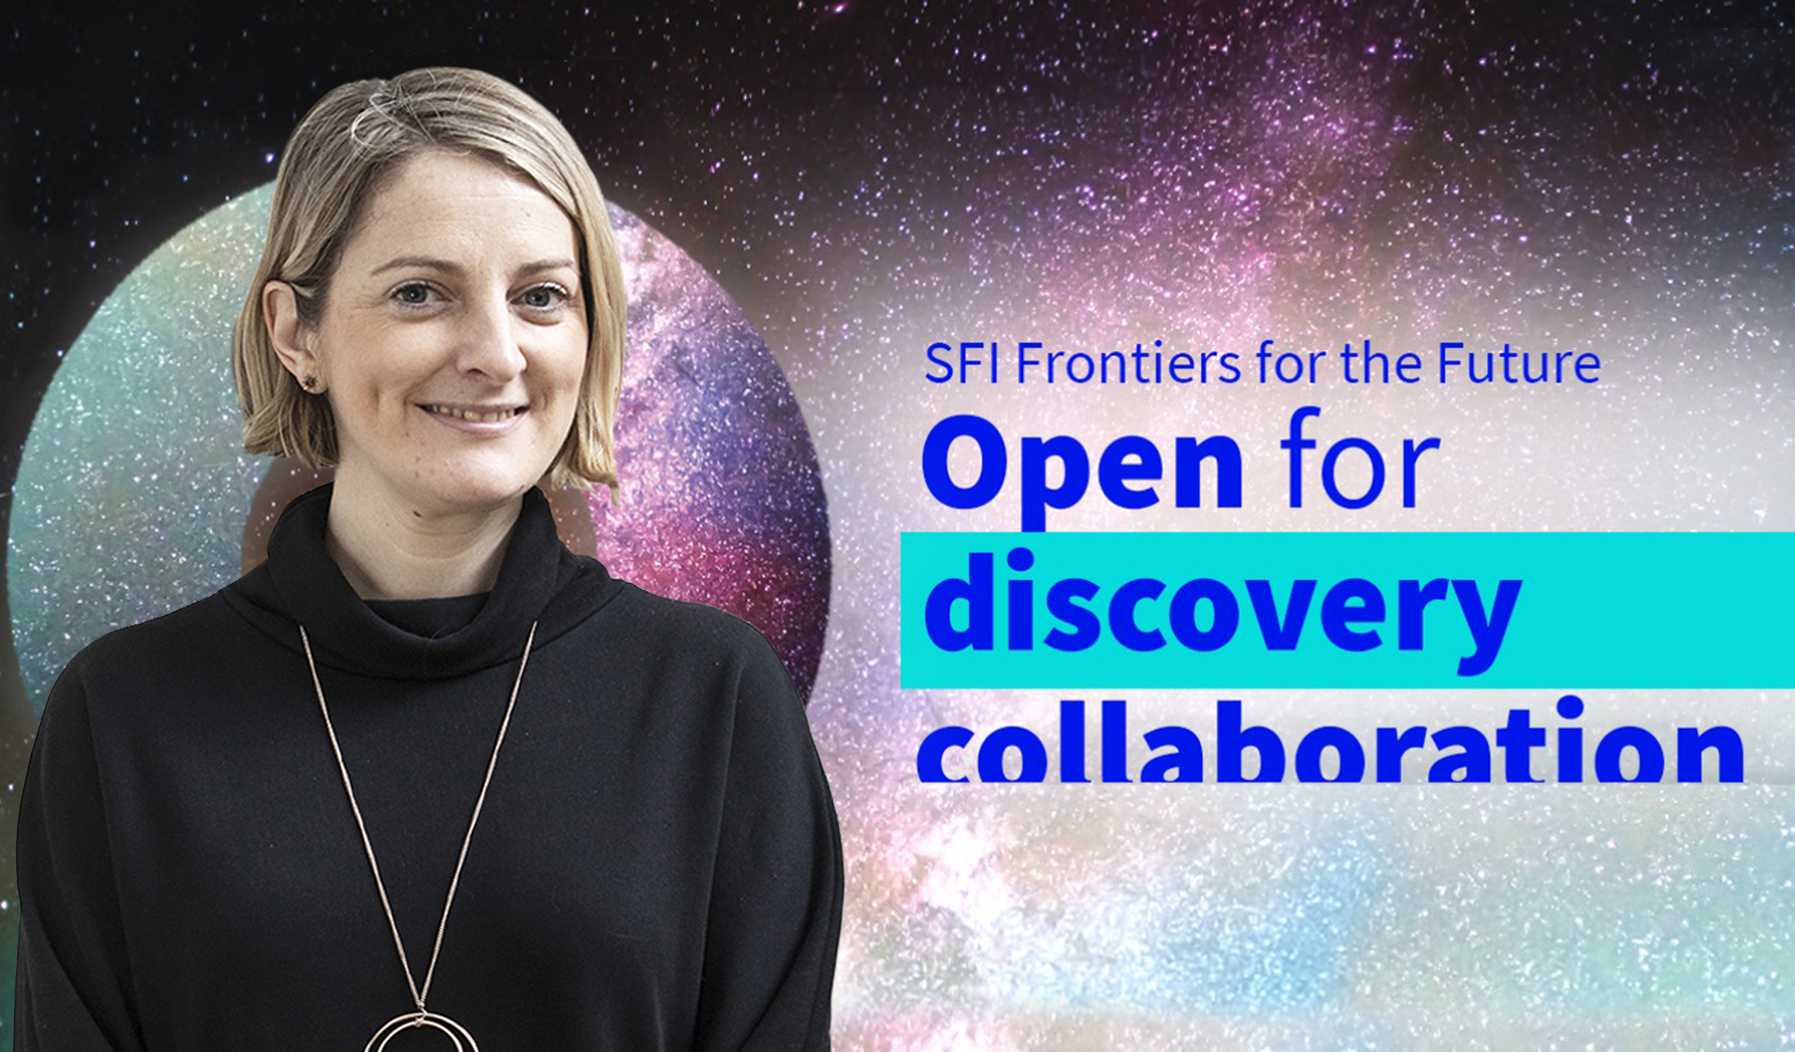 Dr. Yvonne Nolan awarded > €1 million from SFI to research brain function during middle age